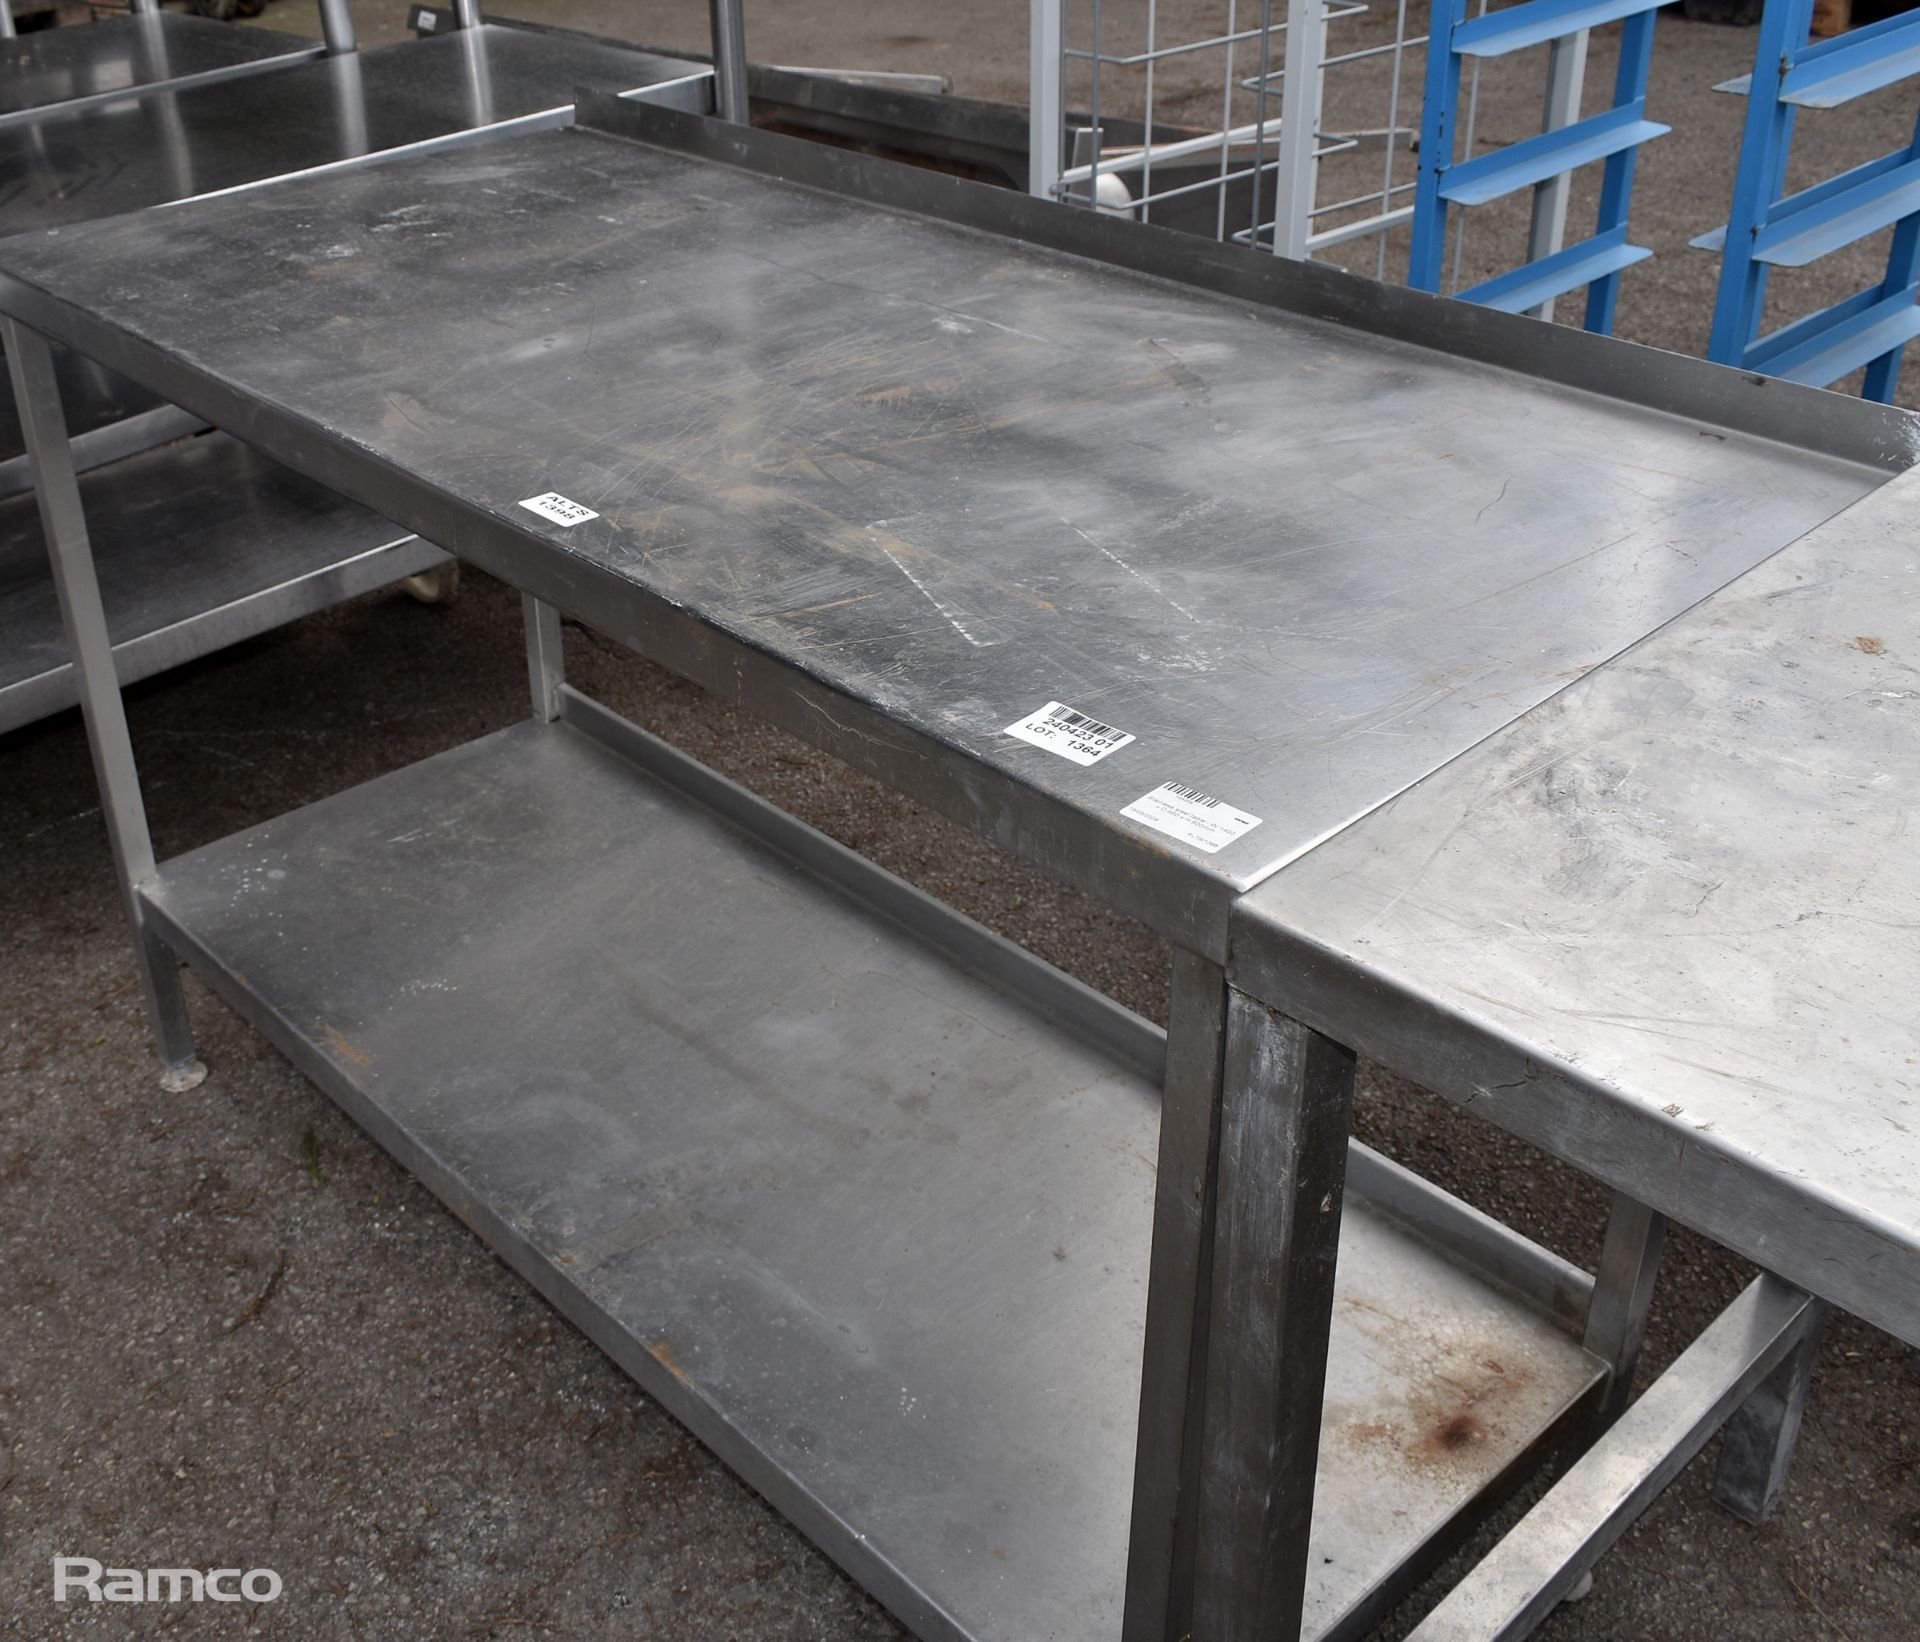 Stainless steel table - W 1400 x D 660 x H 900mm - Image 3 of 3